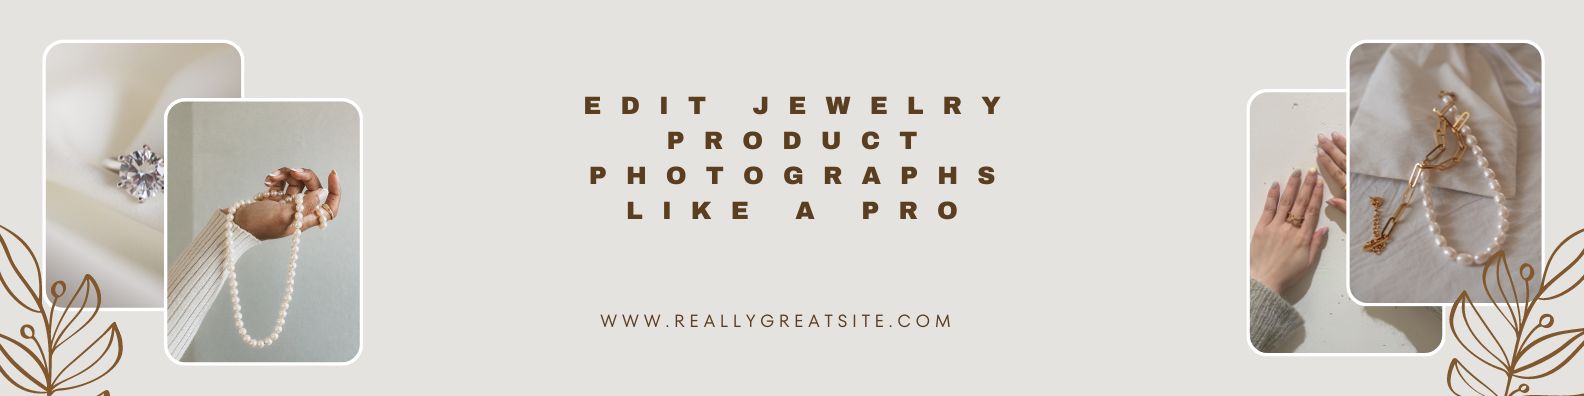 Edit Jewelry Product Photographs Like a Pro